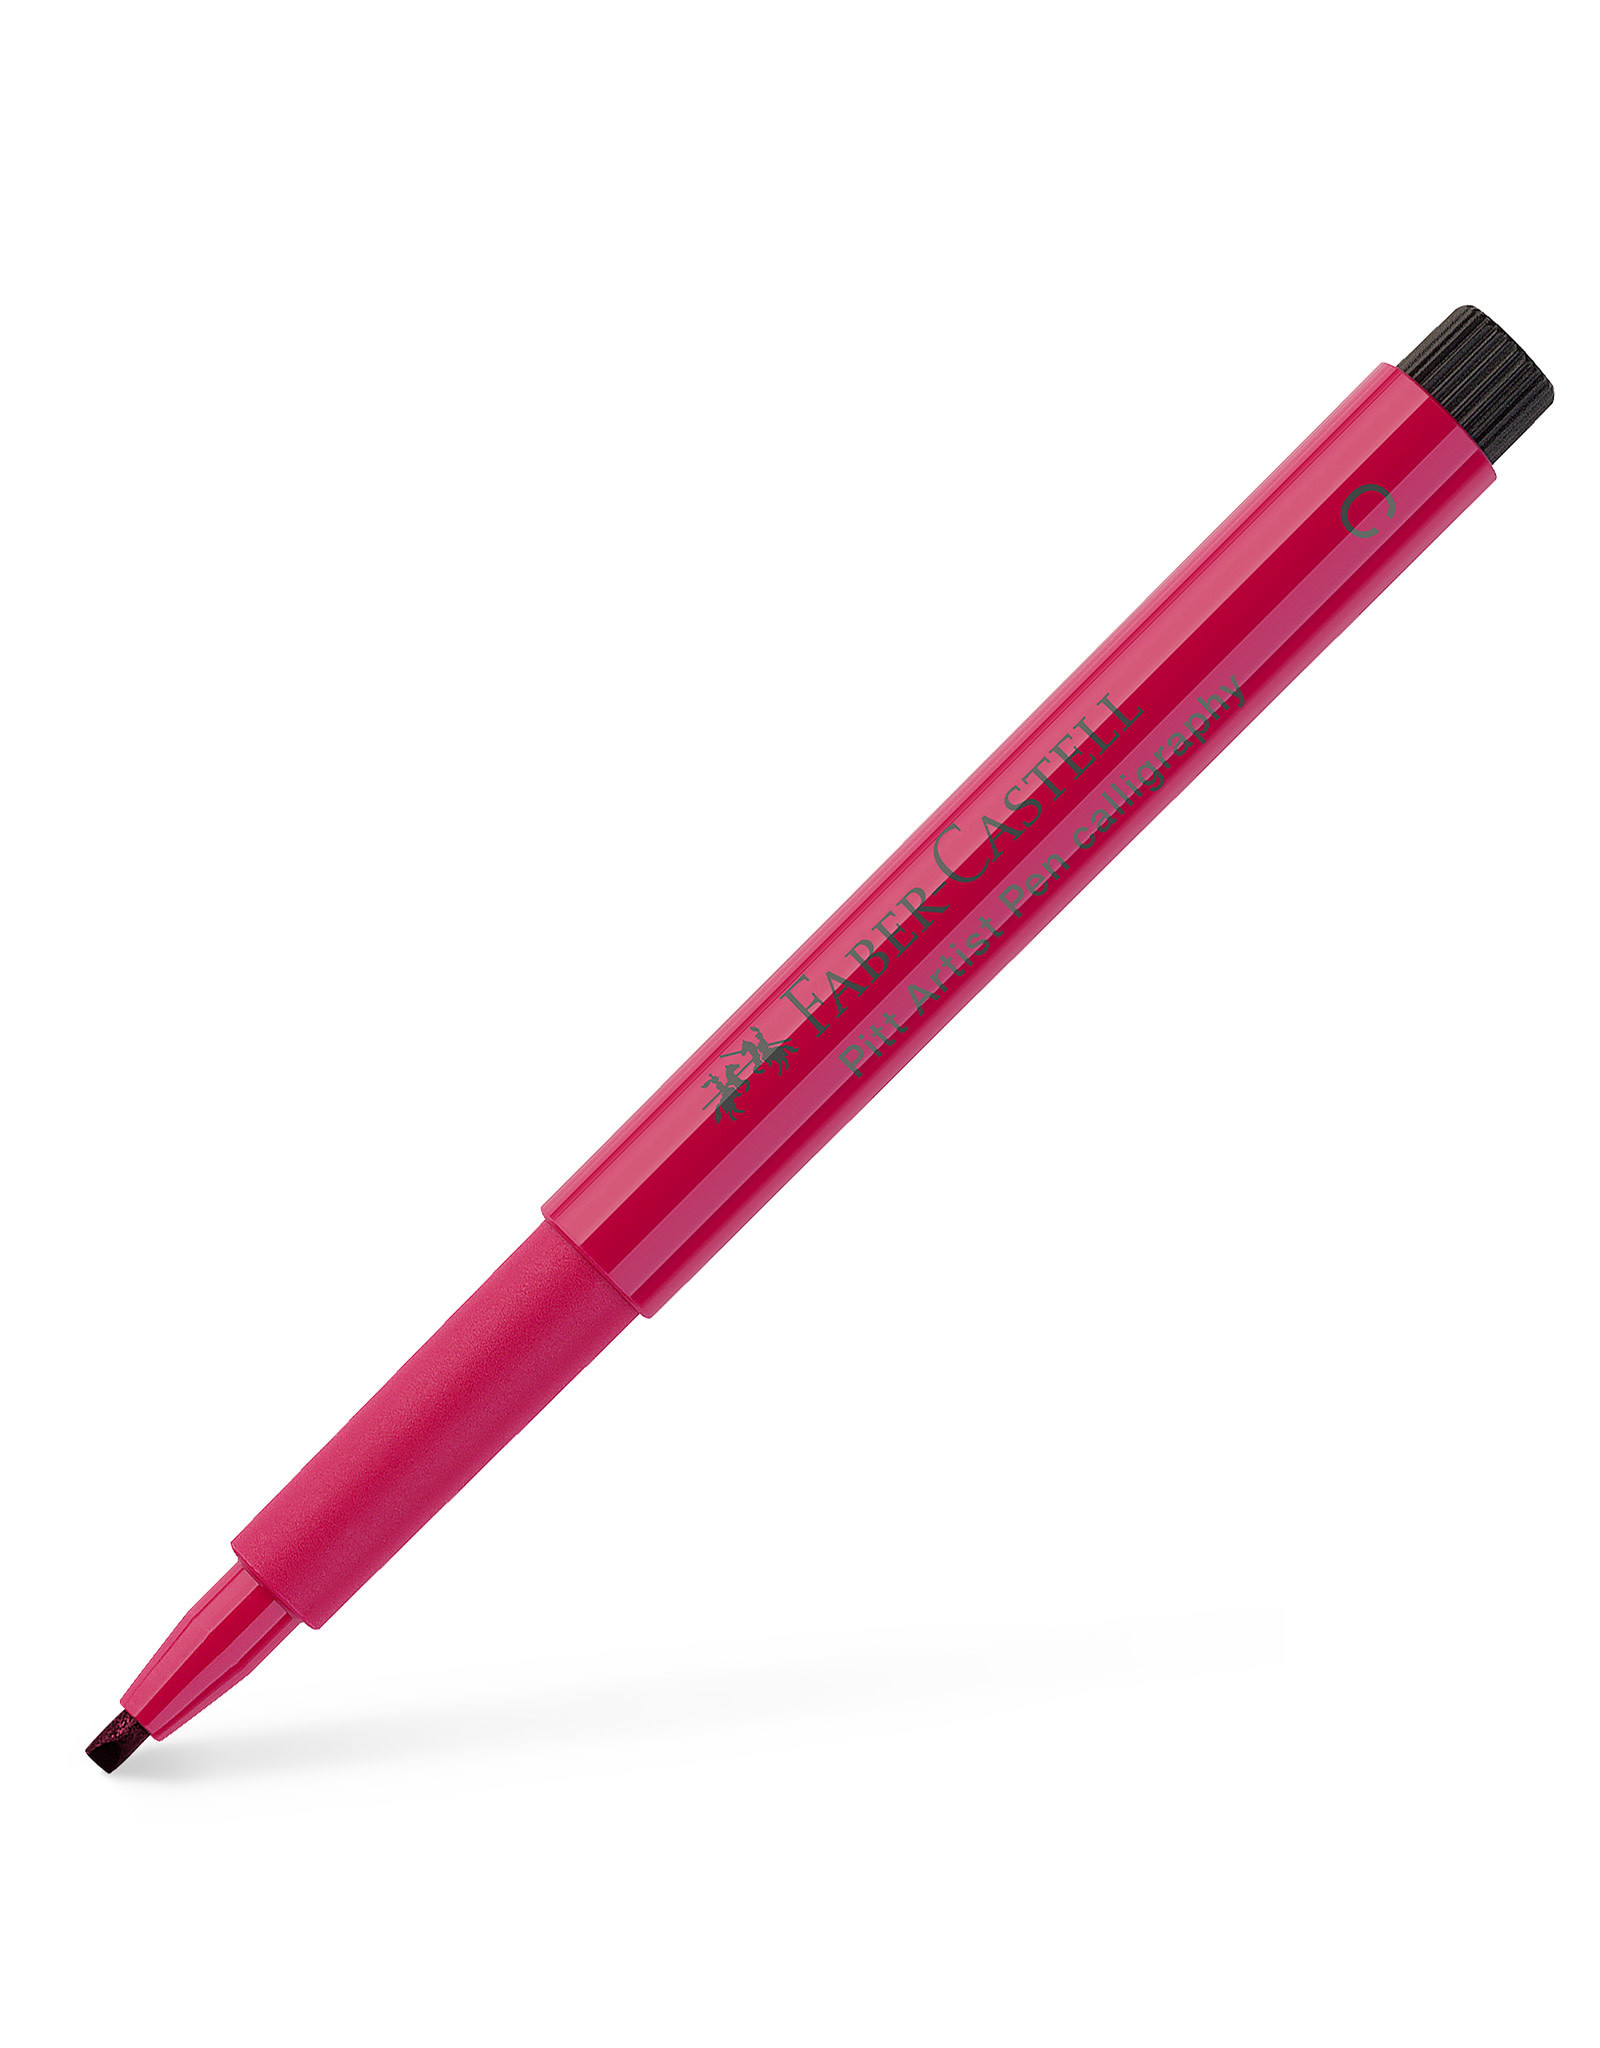 FABER-CASTELL Faber-Castell Calligraphy Pen, Pink Carmine